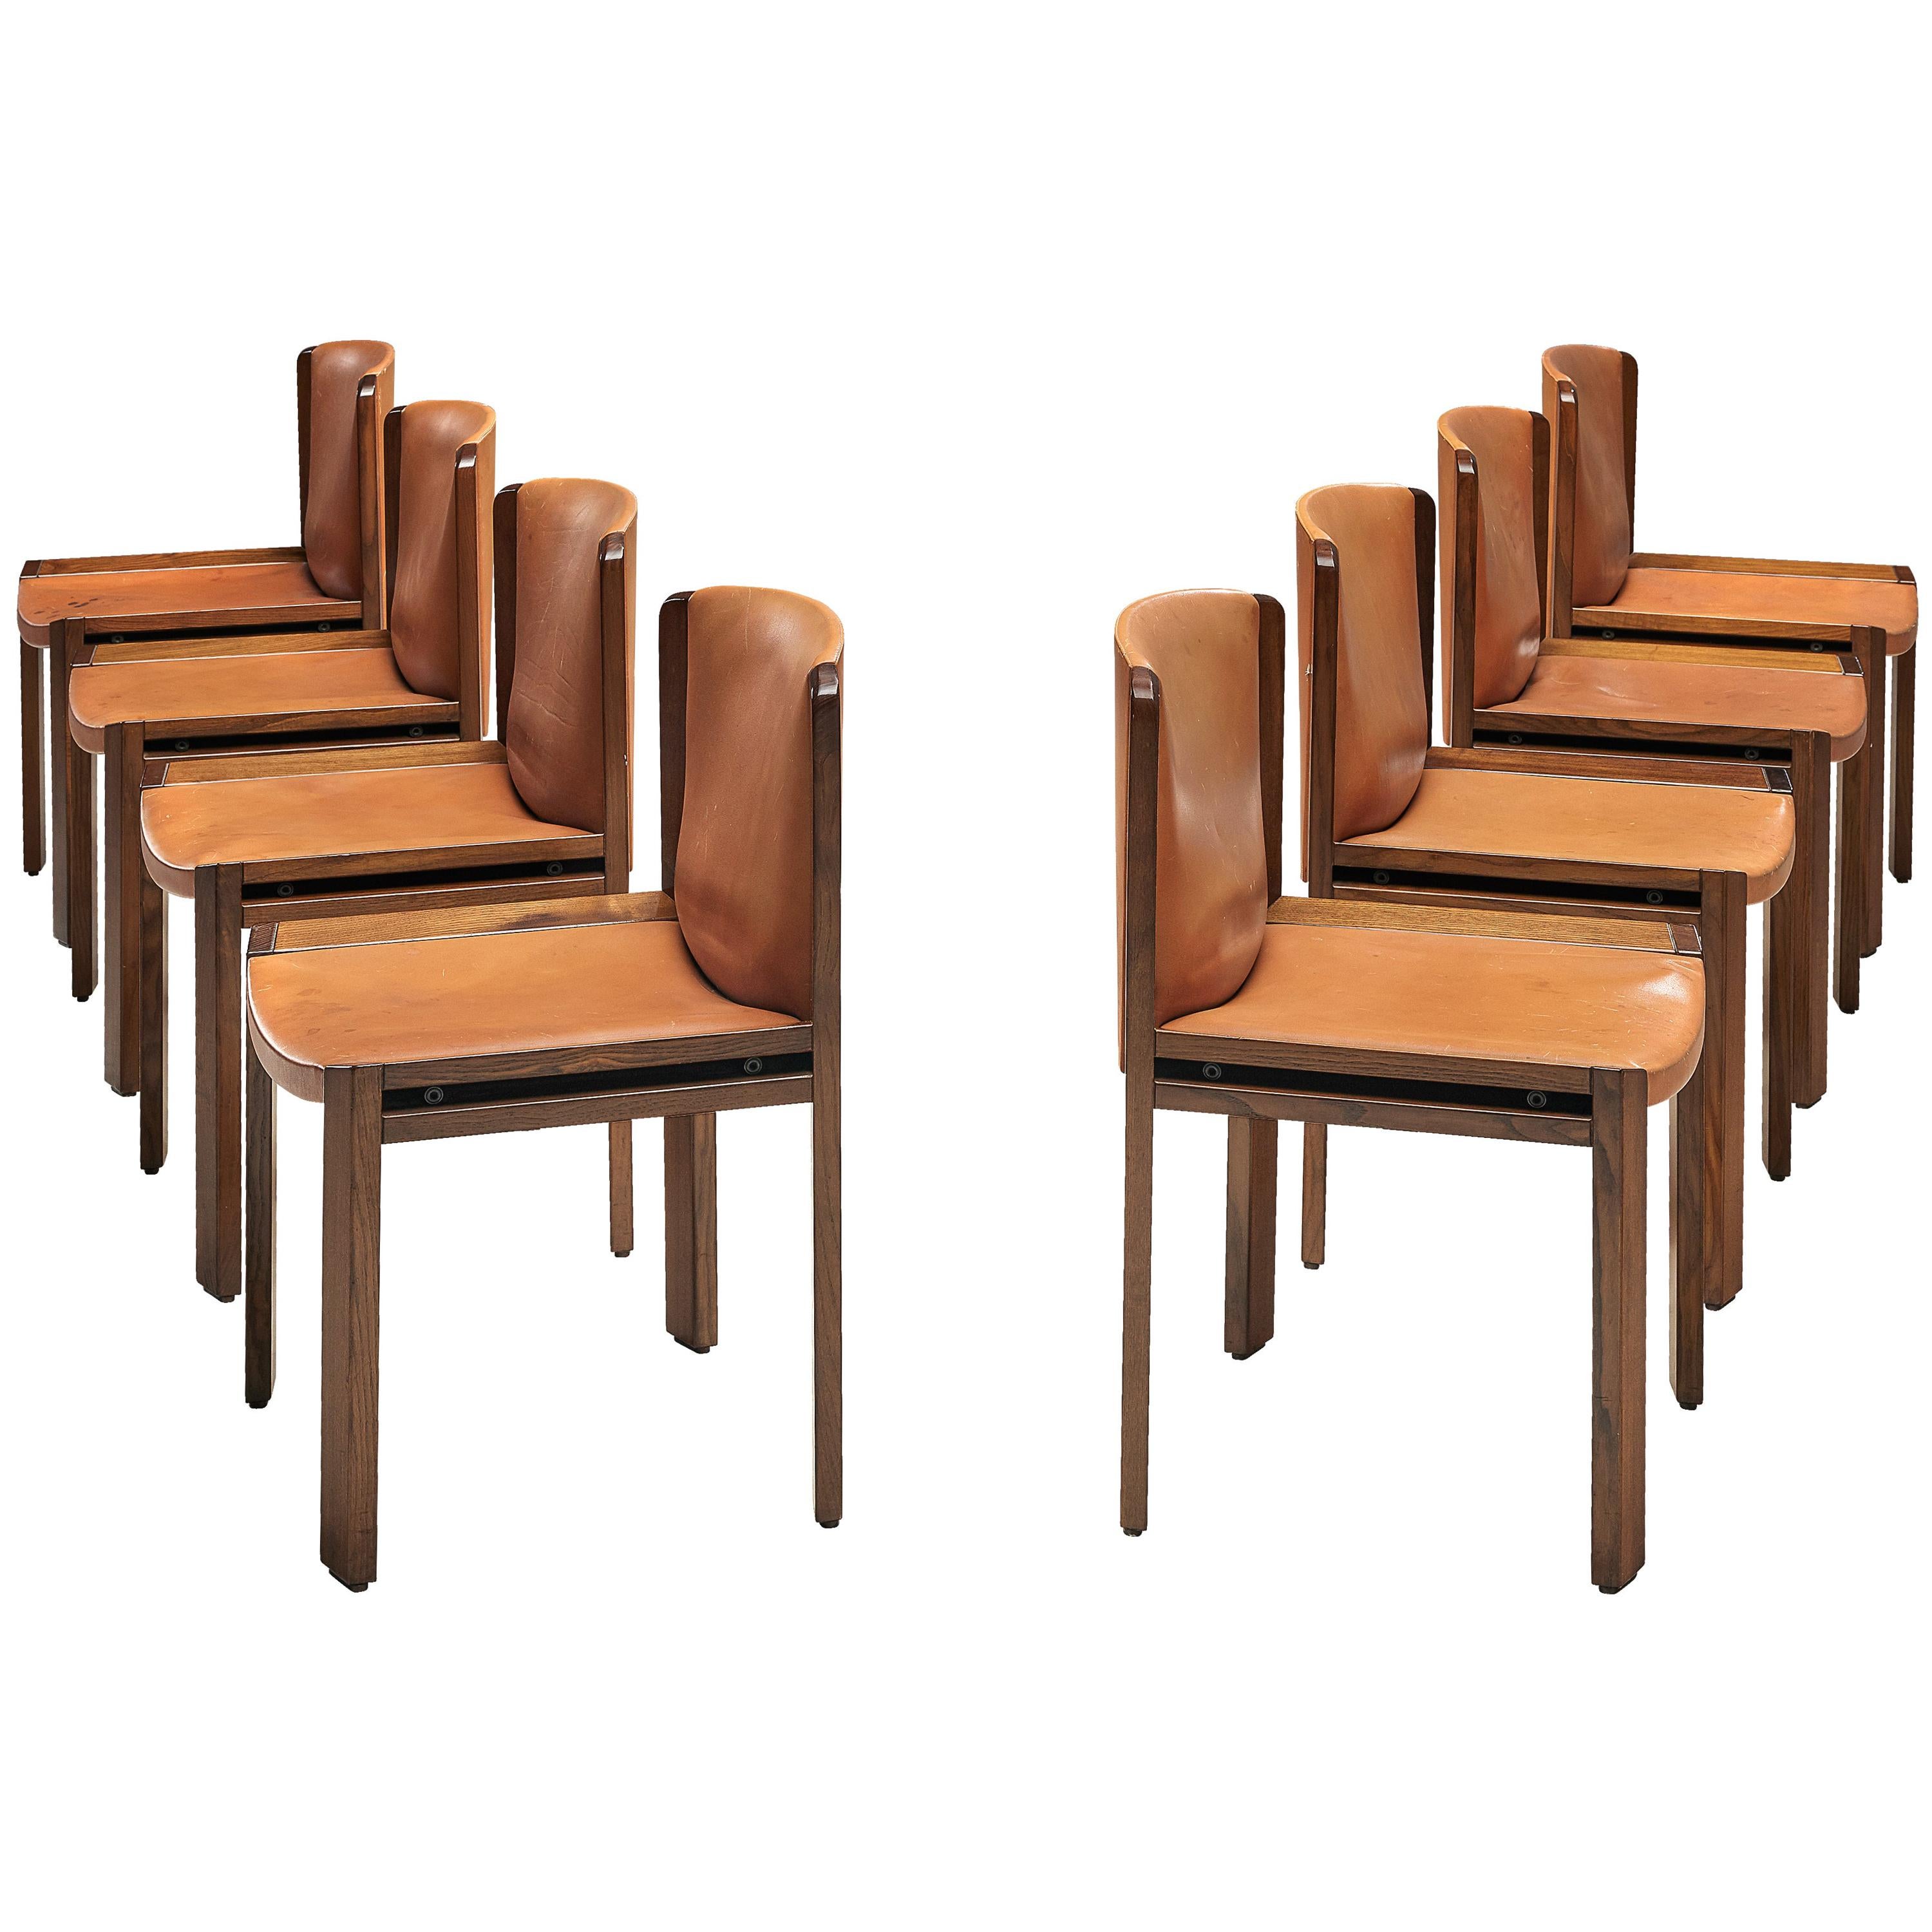 Joe Colombo Set of Eight '300' Dining Chairs in Cognac Leather